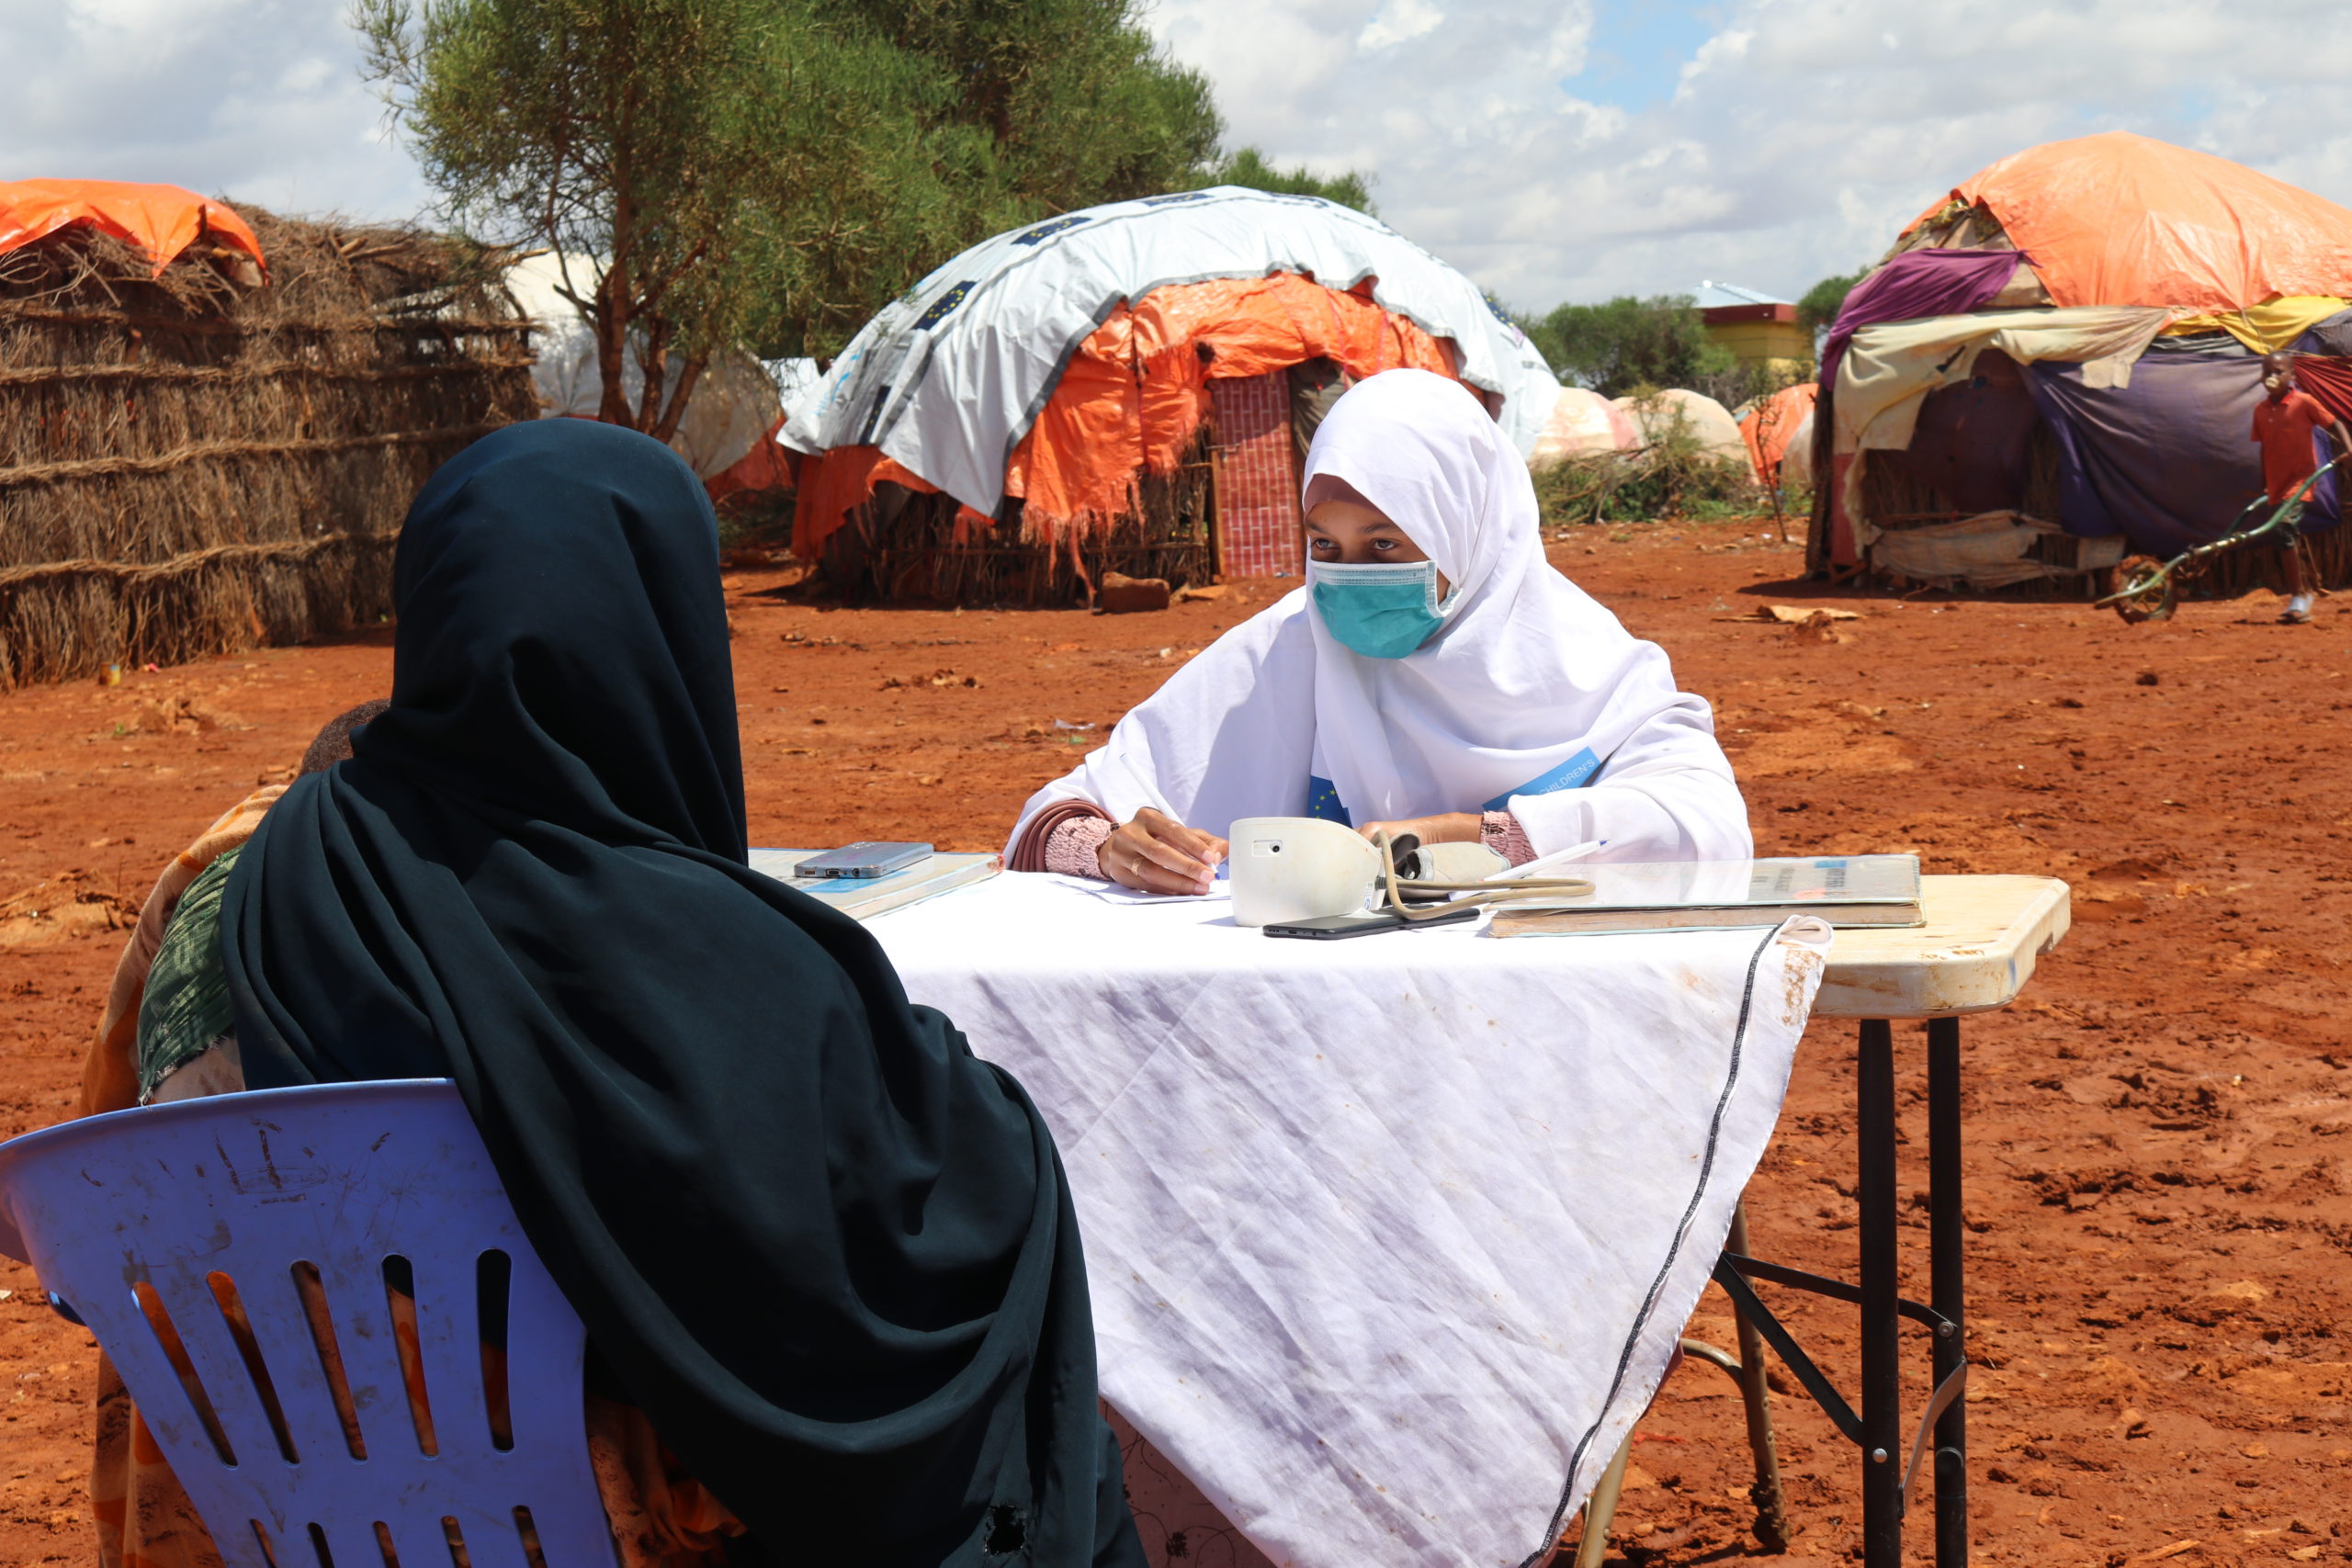 SOS Children's Villages provides health services for families affected by floods in Baidoa, Somalia.